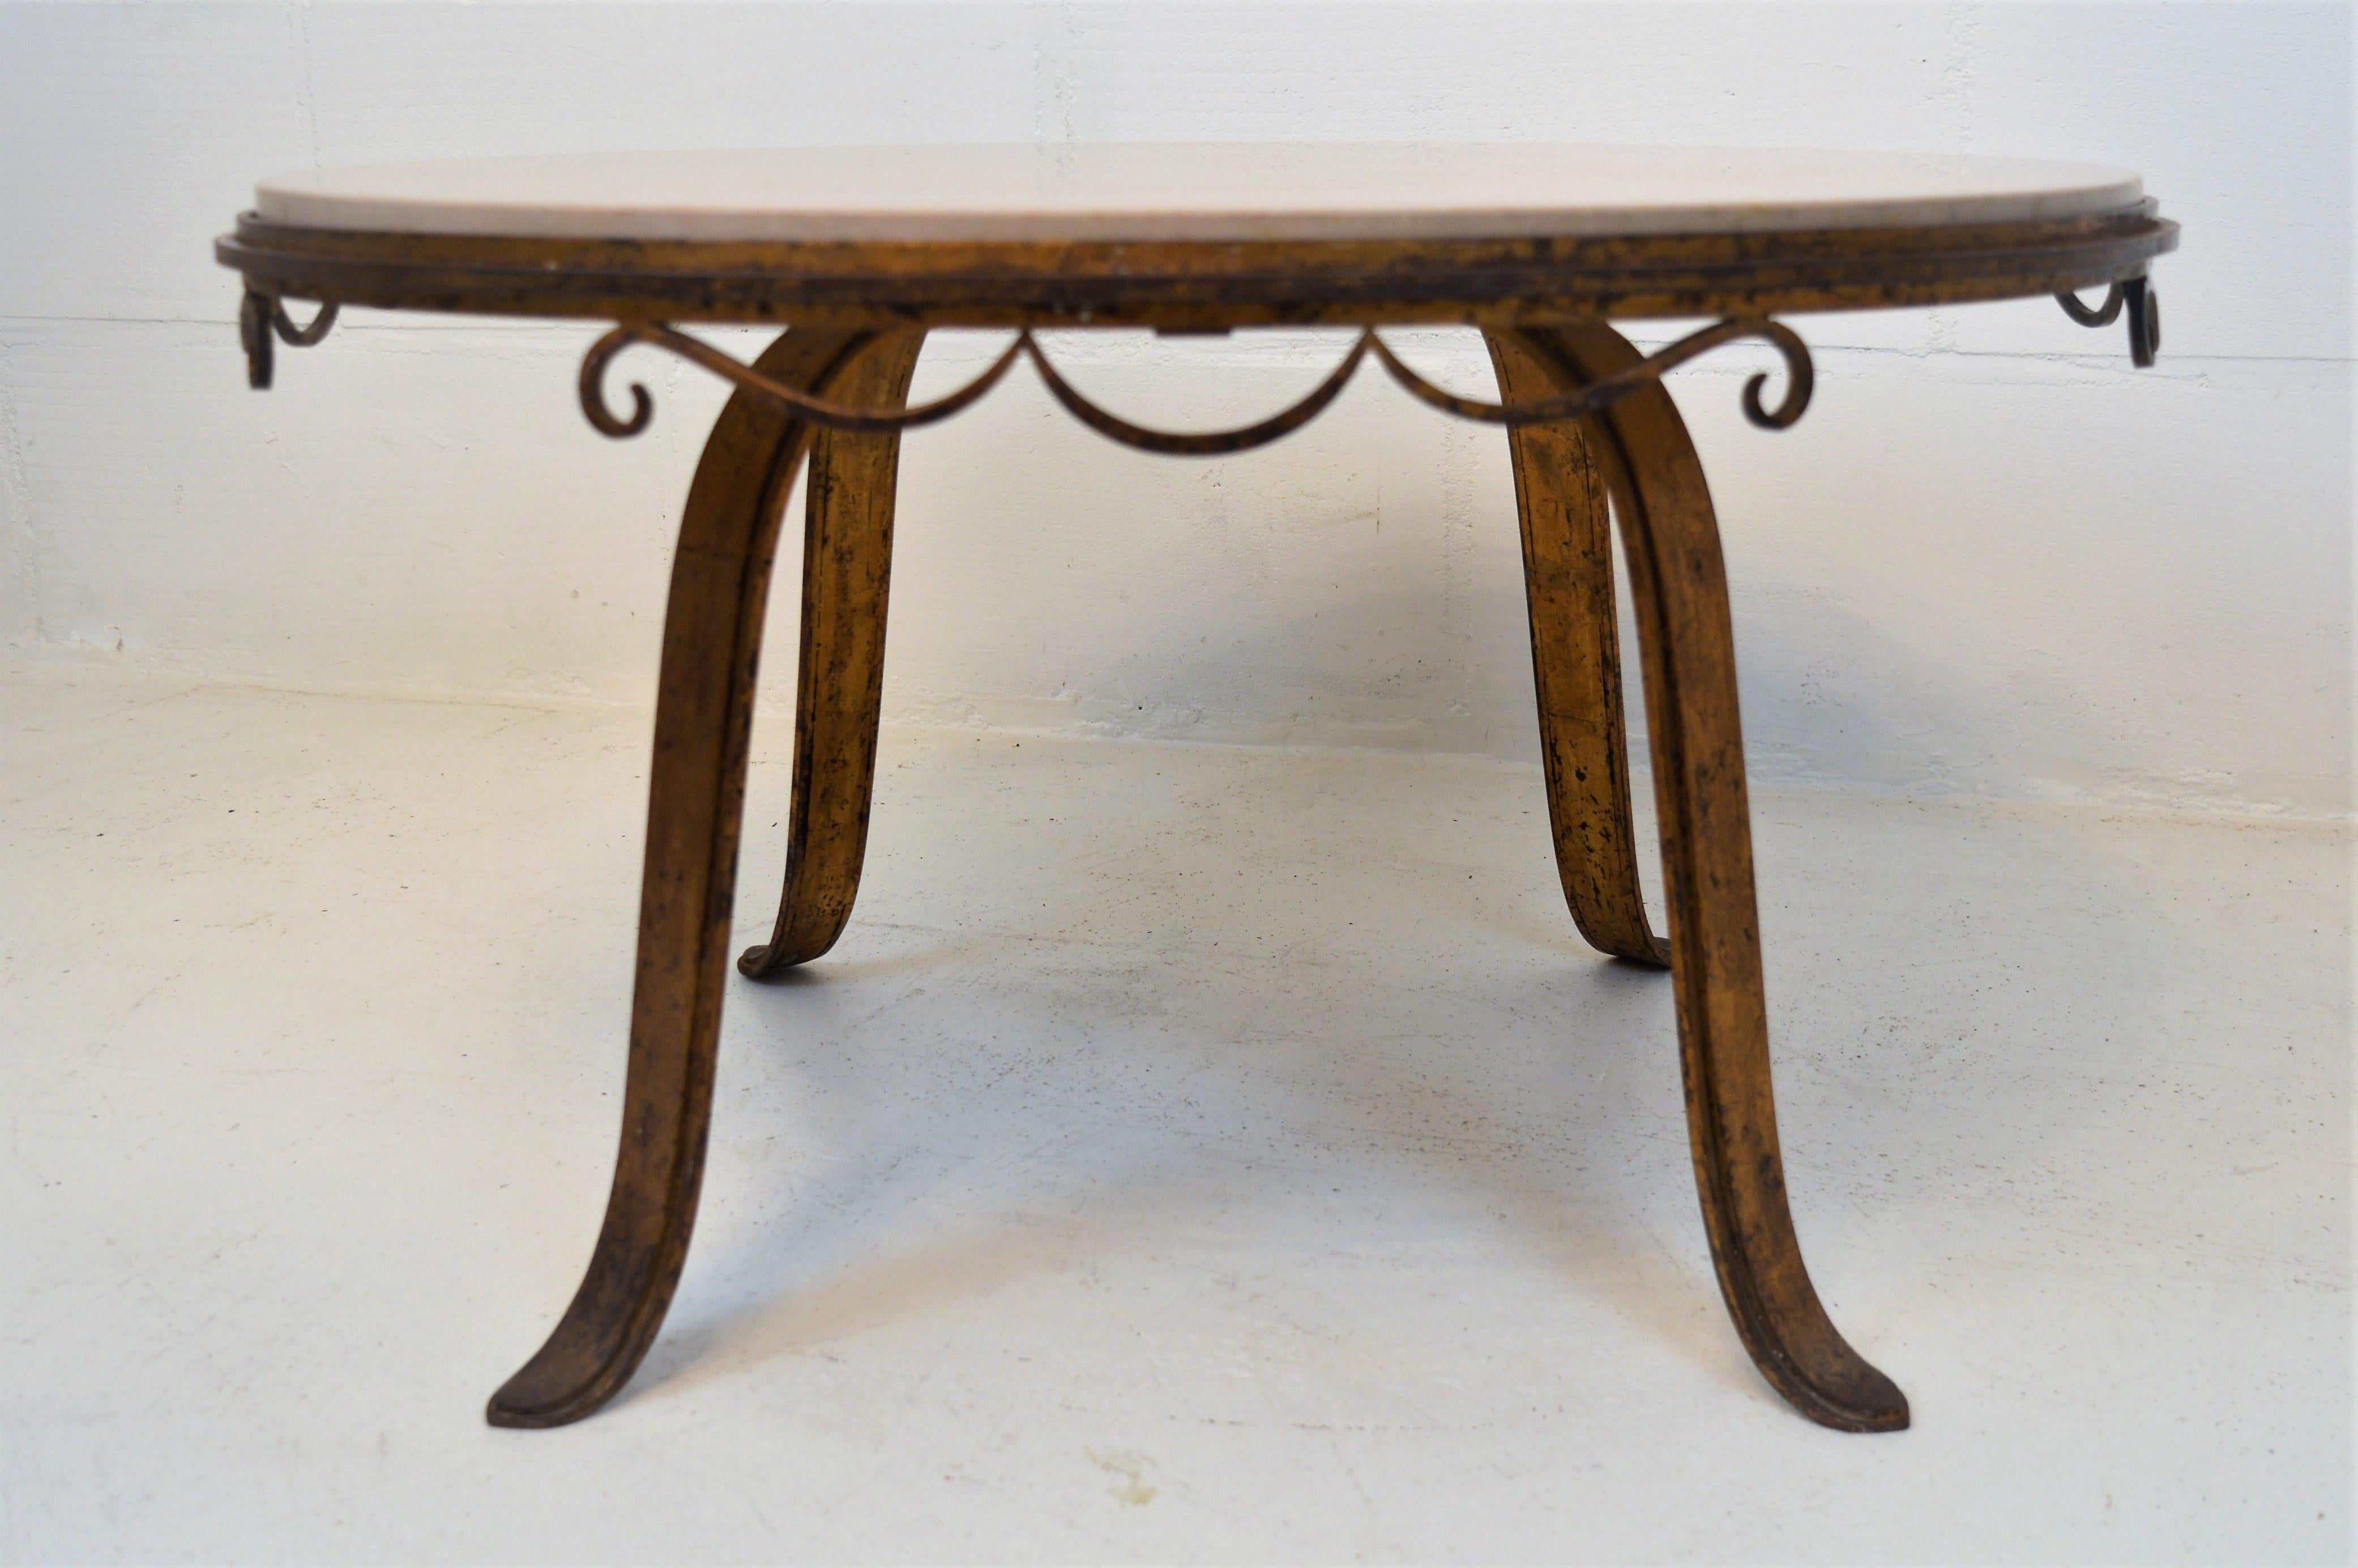 Distinguist cast-iron gilded coffee-table with marble top, probably designed by the French artist Raymond Subes.